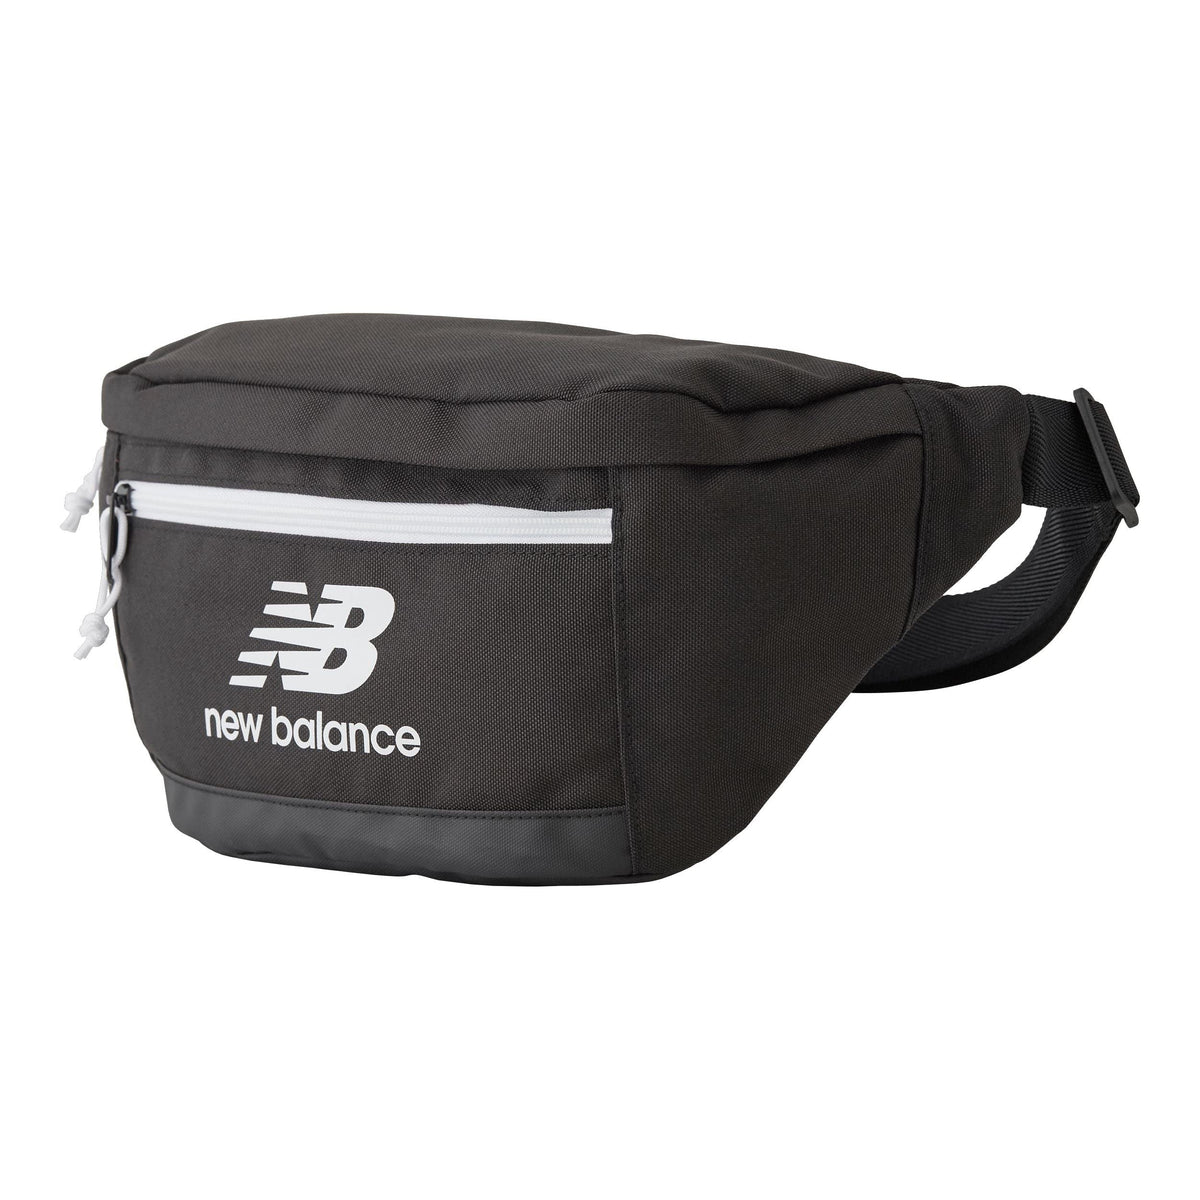 New Balance Mens, Womens, Unisex Athletics Bum Bag, Stylish and Functional for Casual and Athletic Wear, One Size, Black